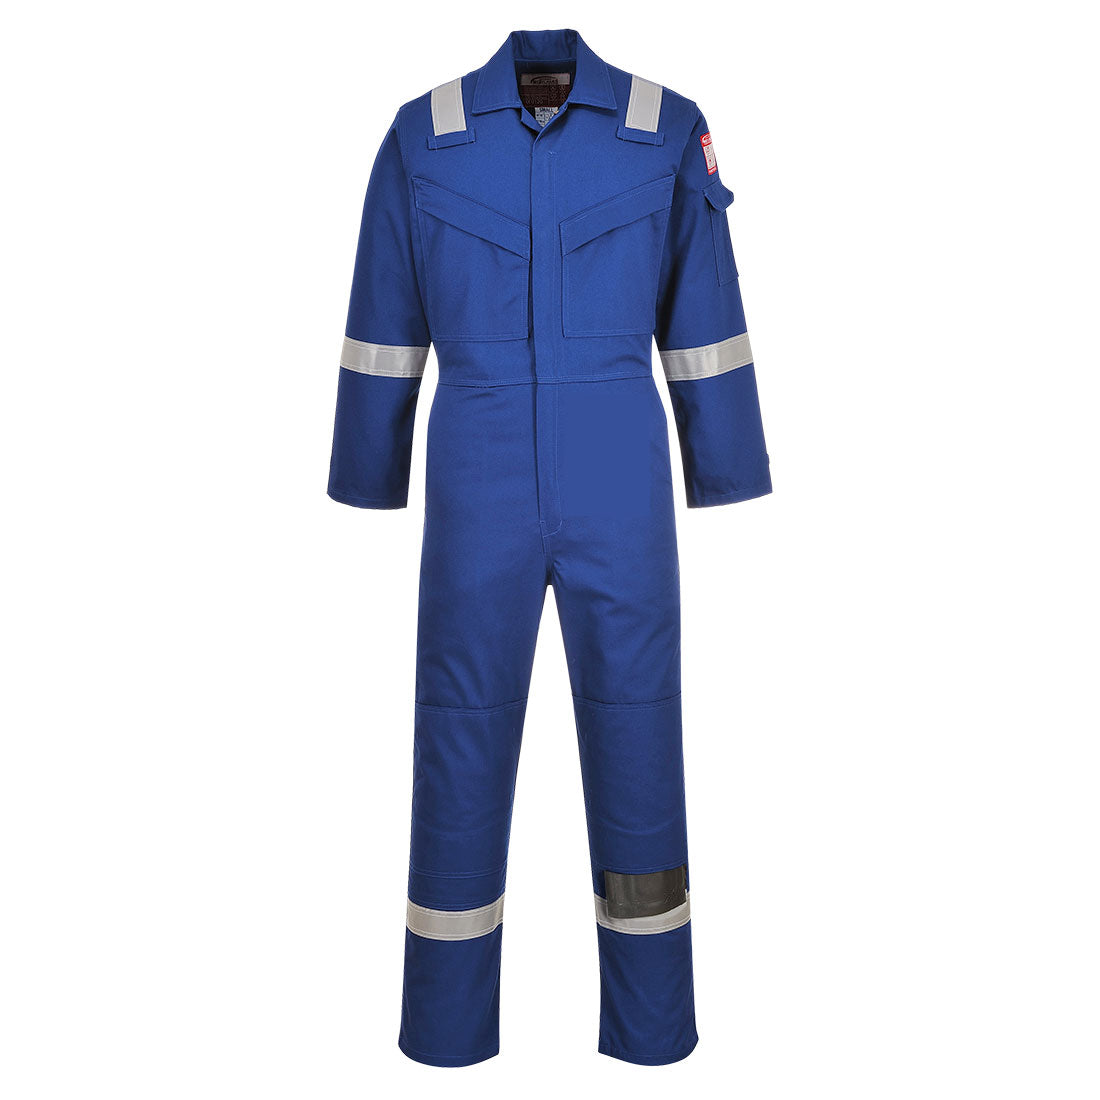 Portwest FR50 Royal Blue Sz S Regular Flame Resistant Anti-Static Boiler Suit Coverall Overall